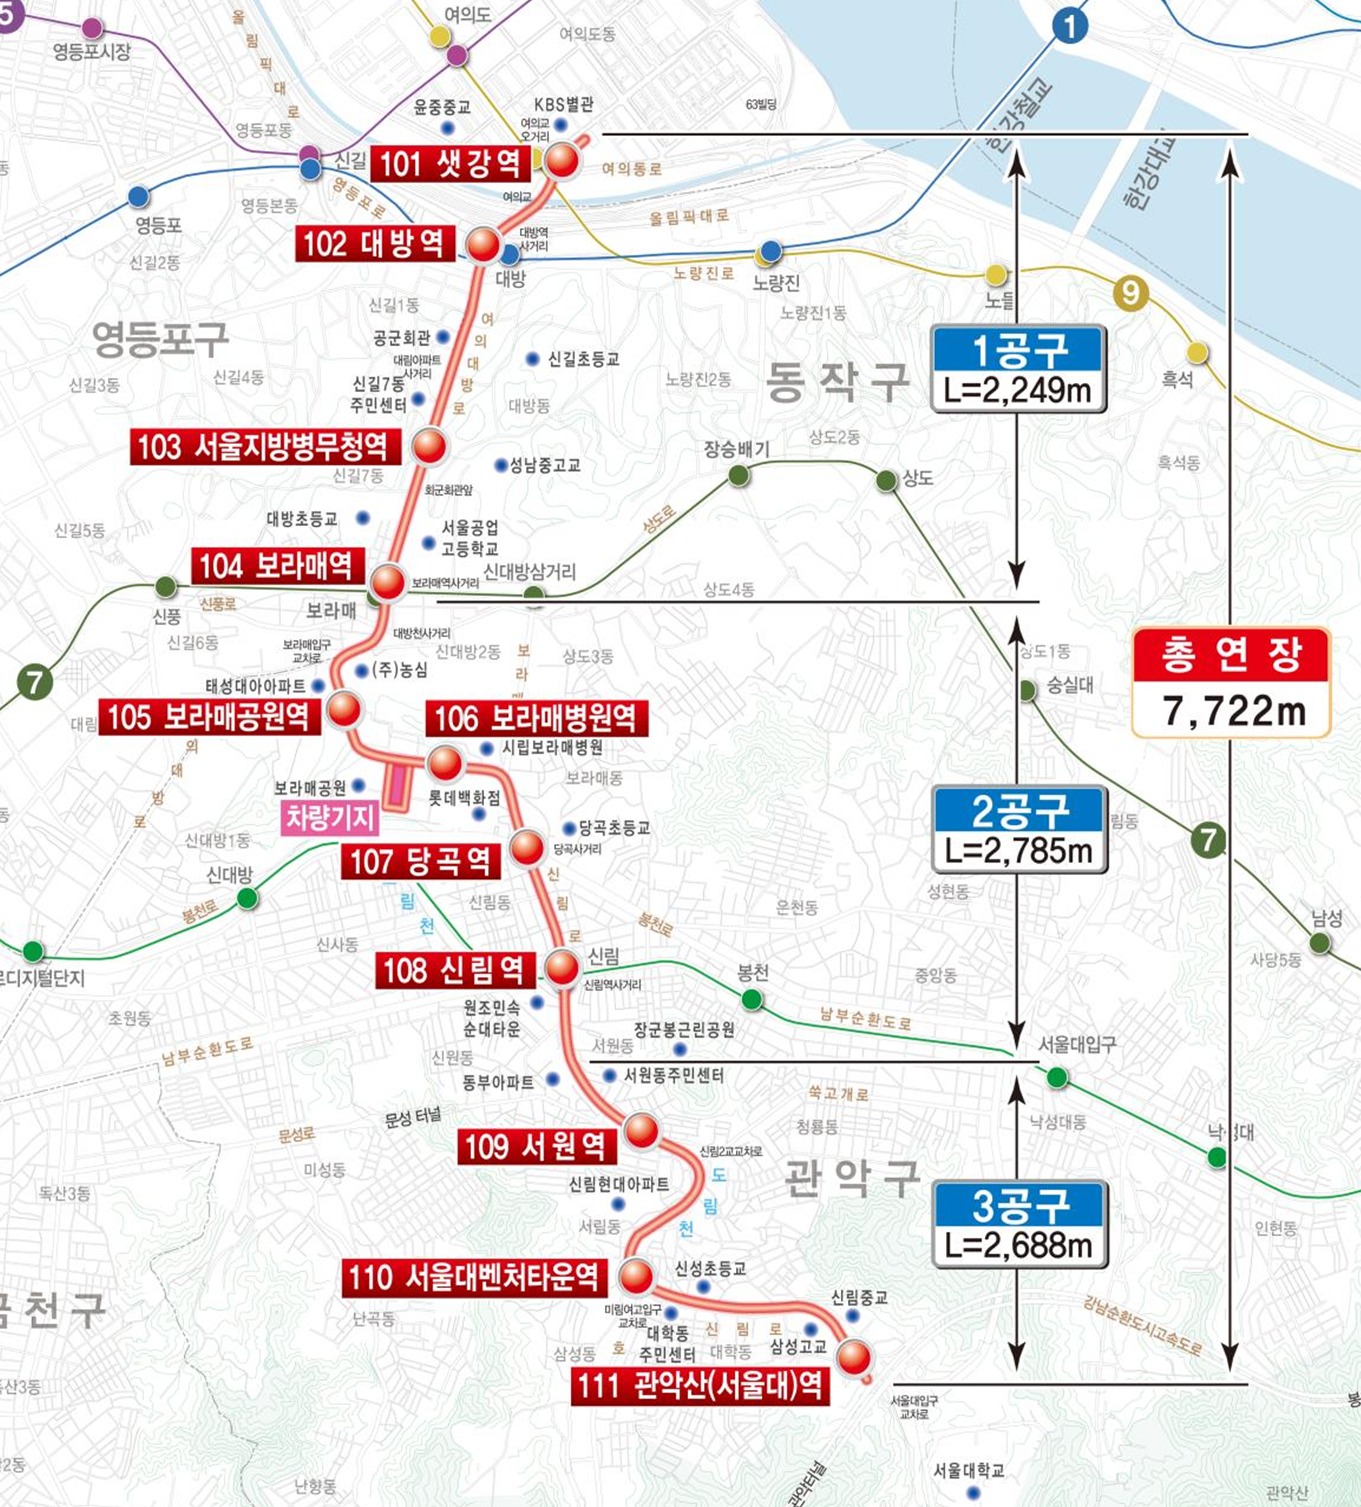 The subway line that will open in May next year in Seoul.